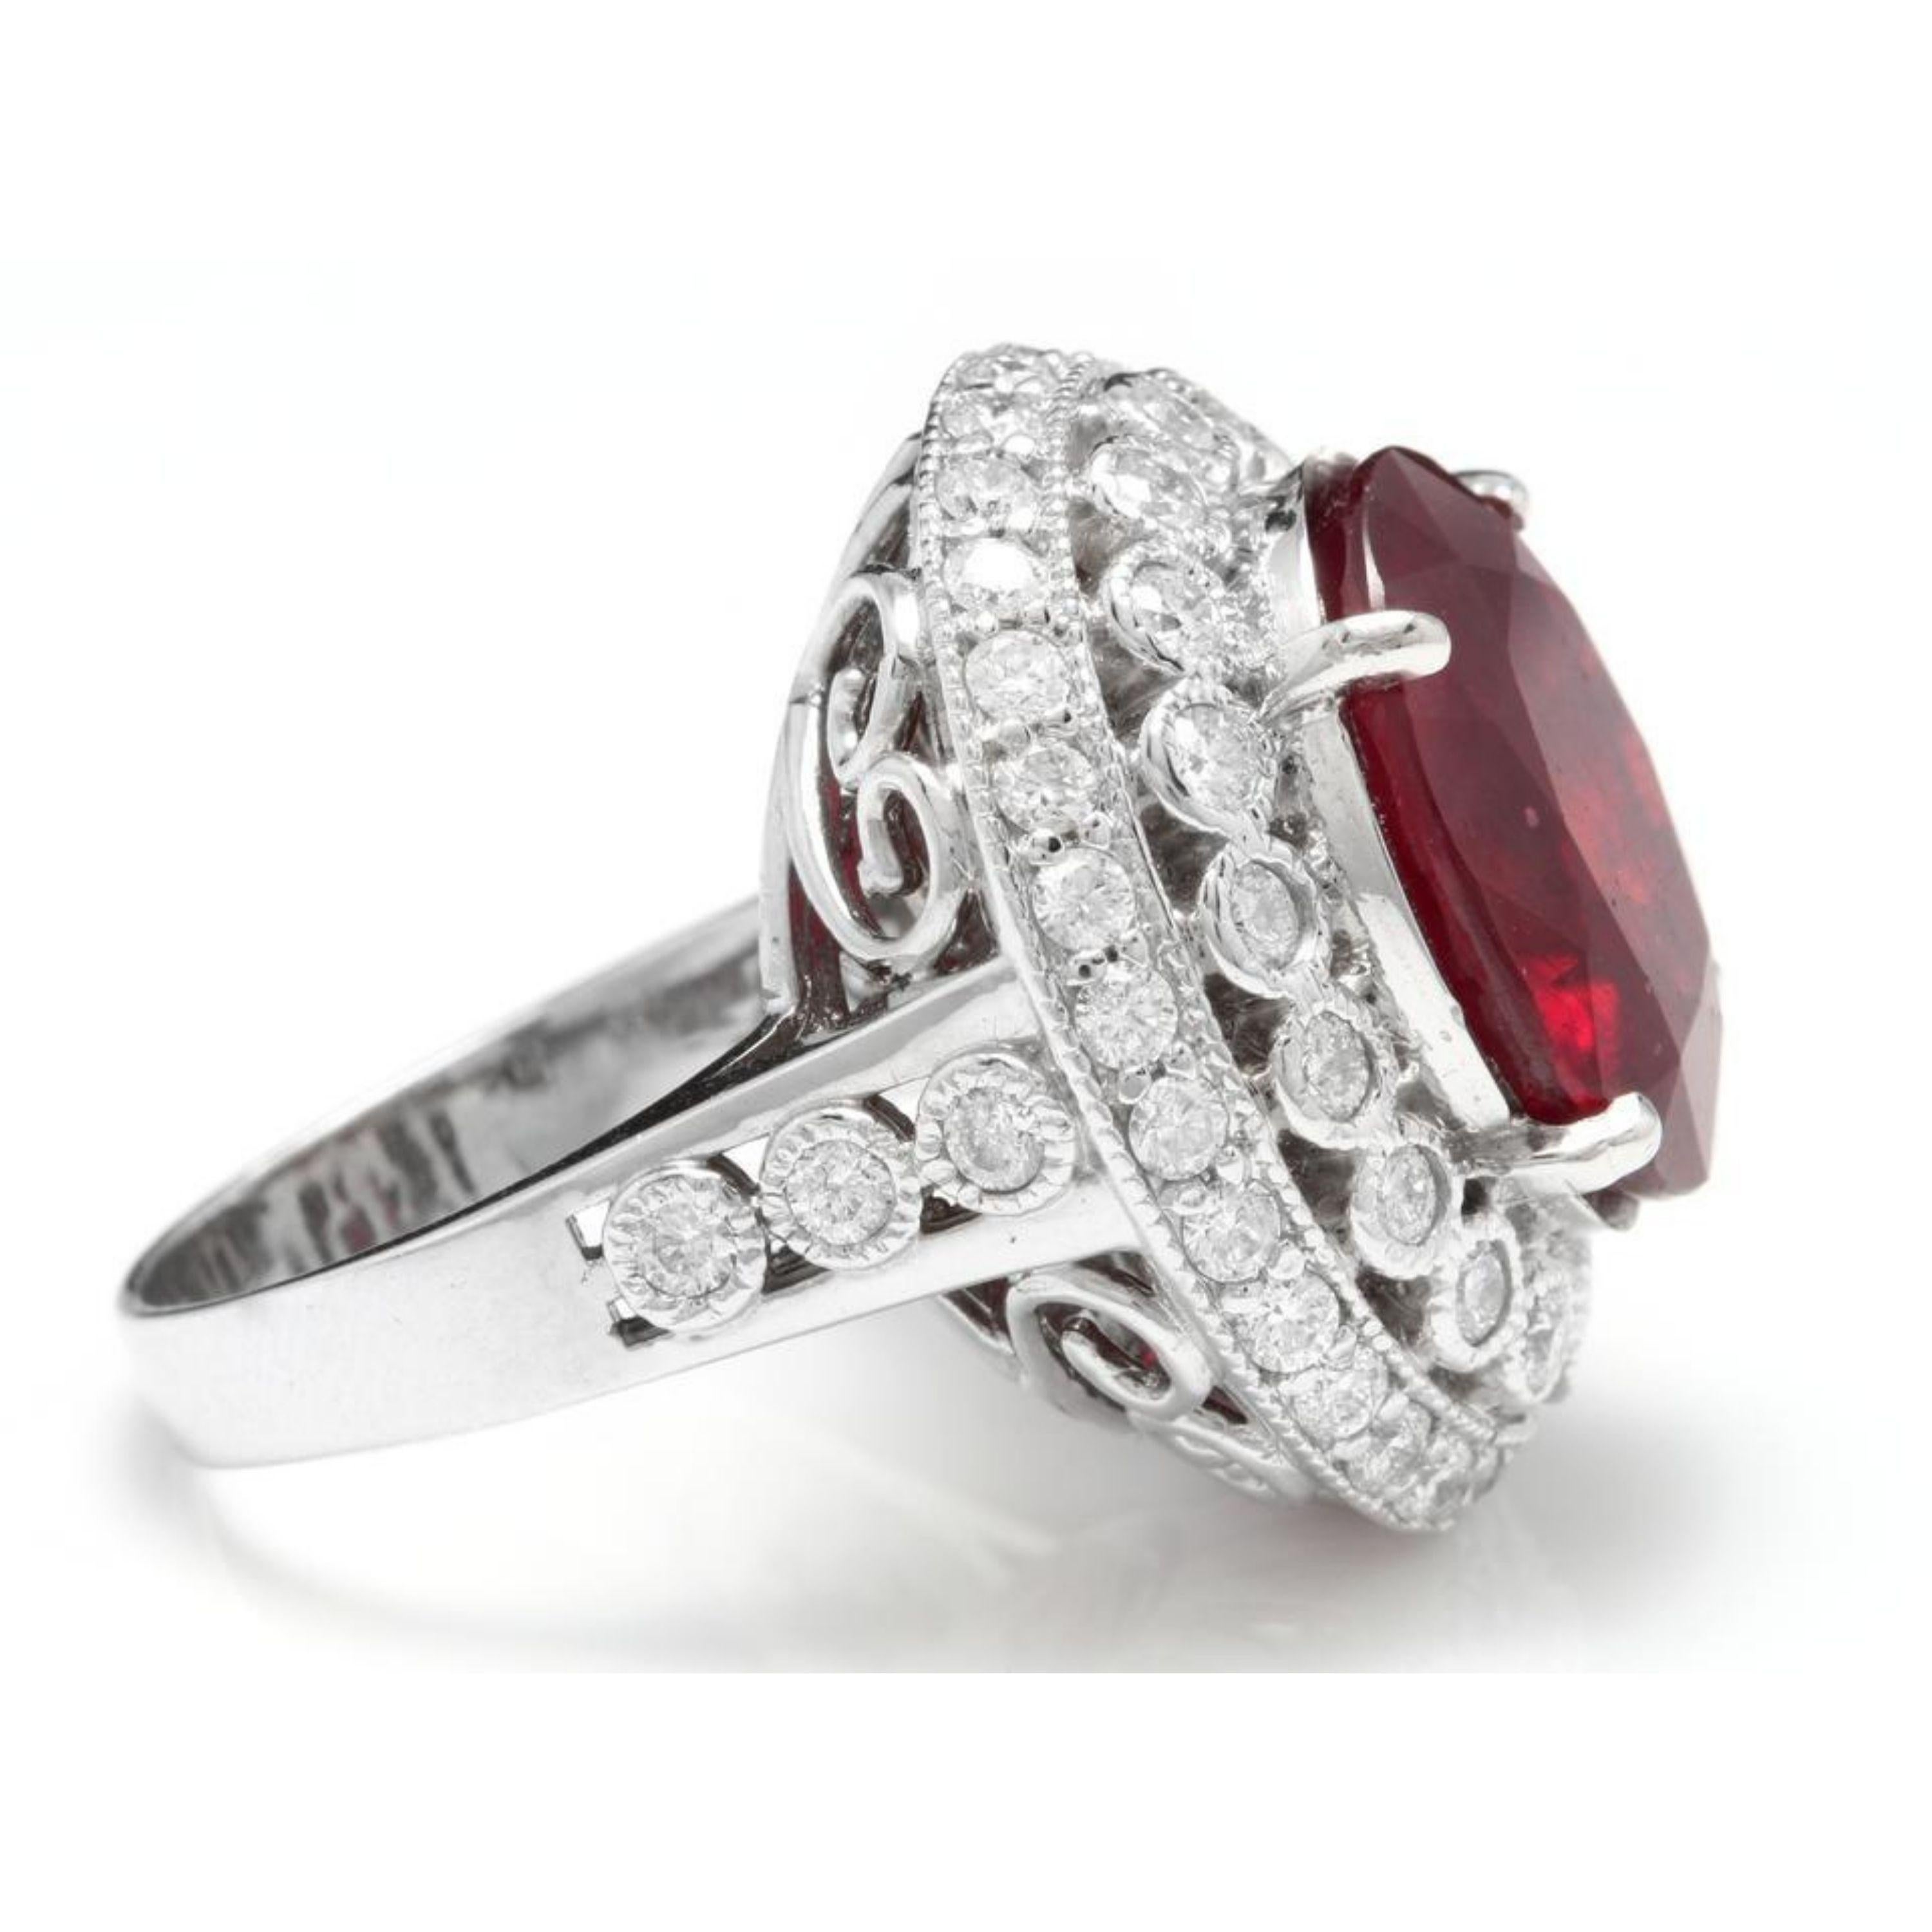 Mixed Cut 14.80 Carat Impressive Red Ruby and Natural Diamond 14 Karat White Gold Ring For Sale